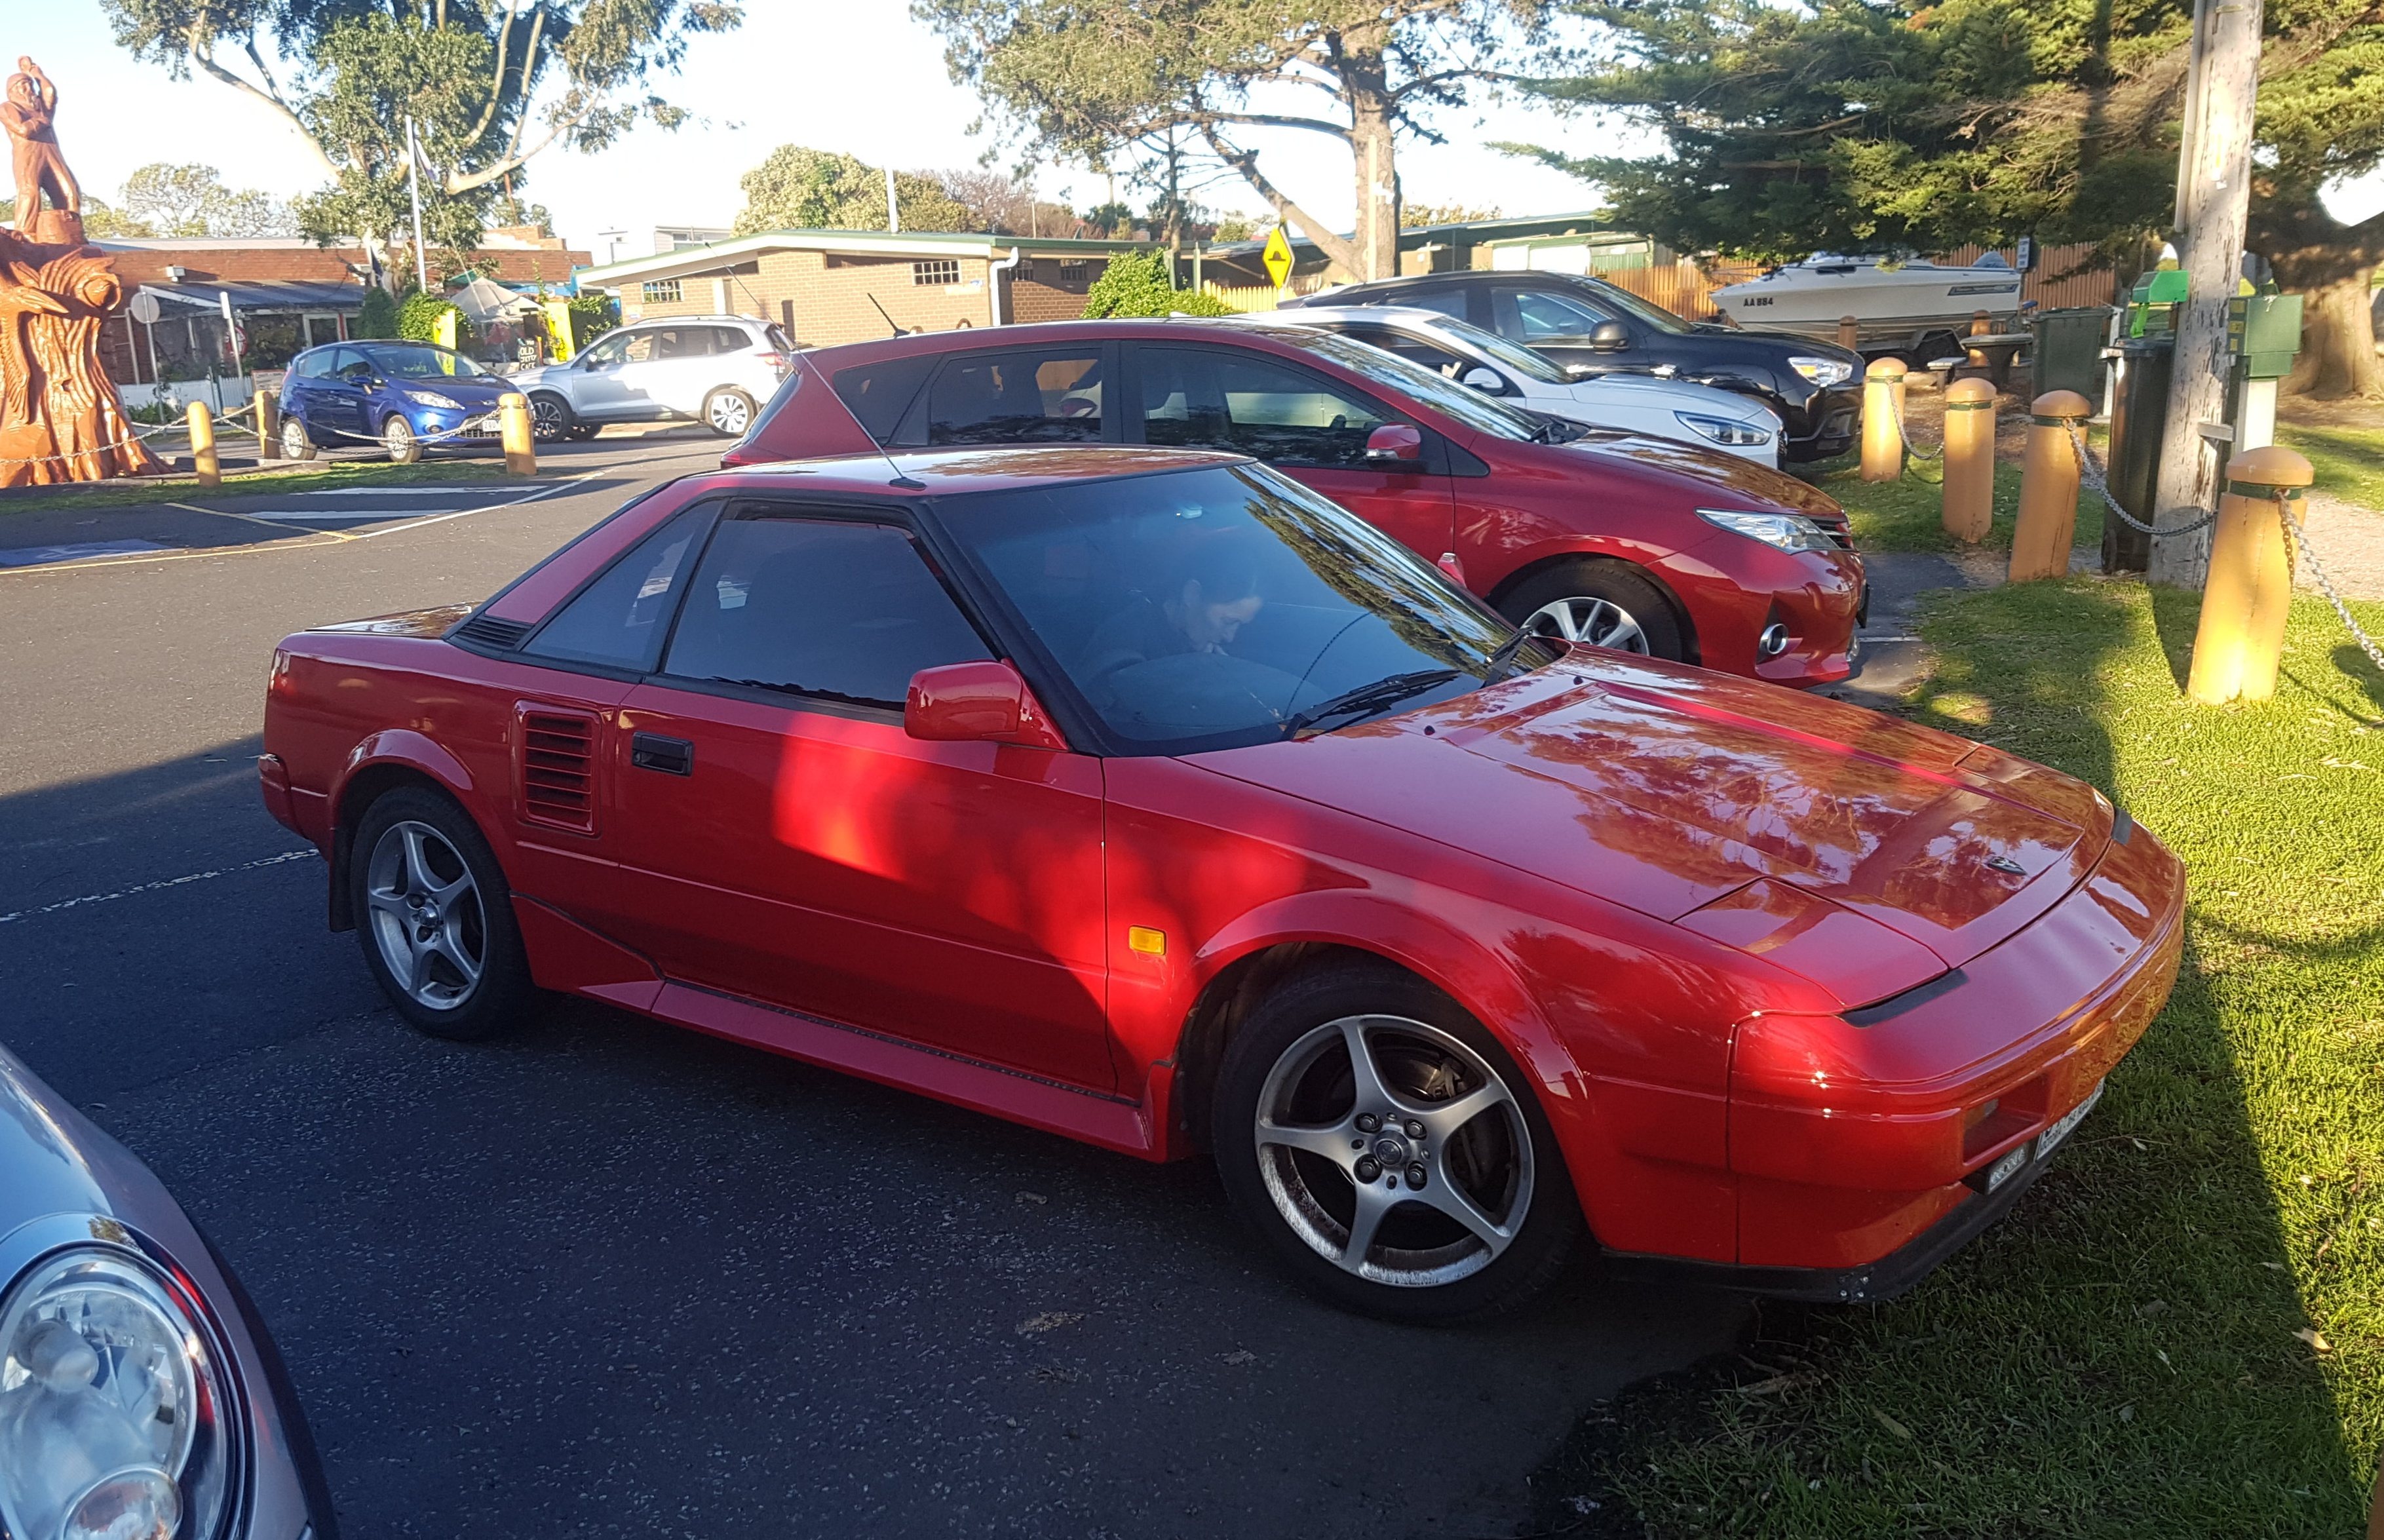 1989 Toyota MR2 Mark 1 - Page 5 - Readers' Cars - PistonHeads